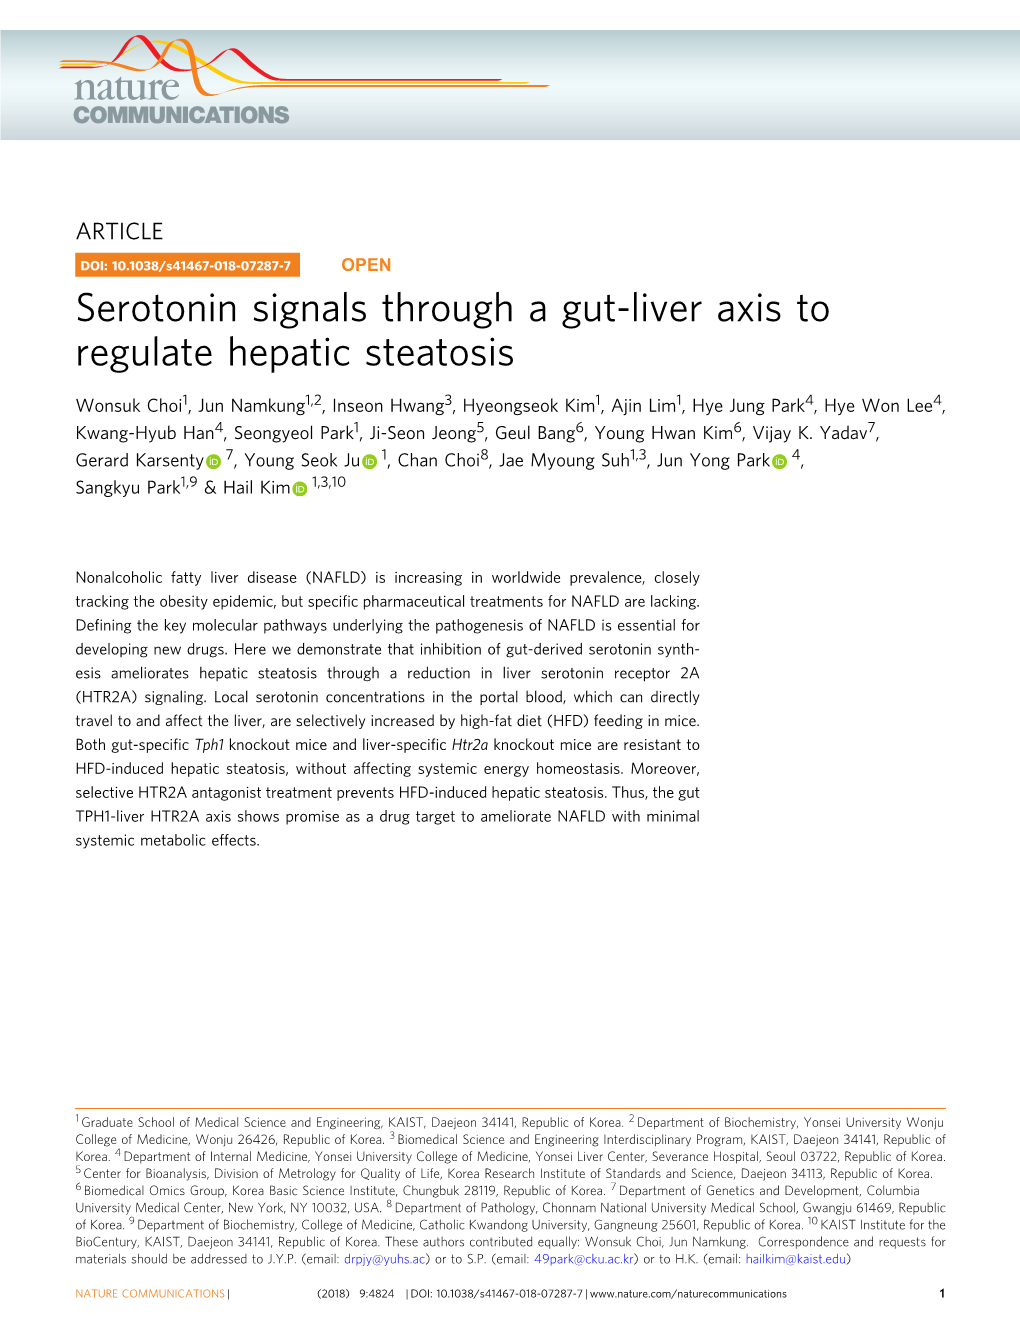 Serotonin Signals Through a Gut-Liver Axis to Regulate Hepatic Steatosis